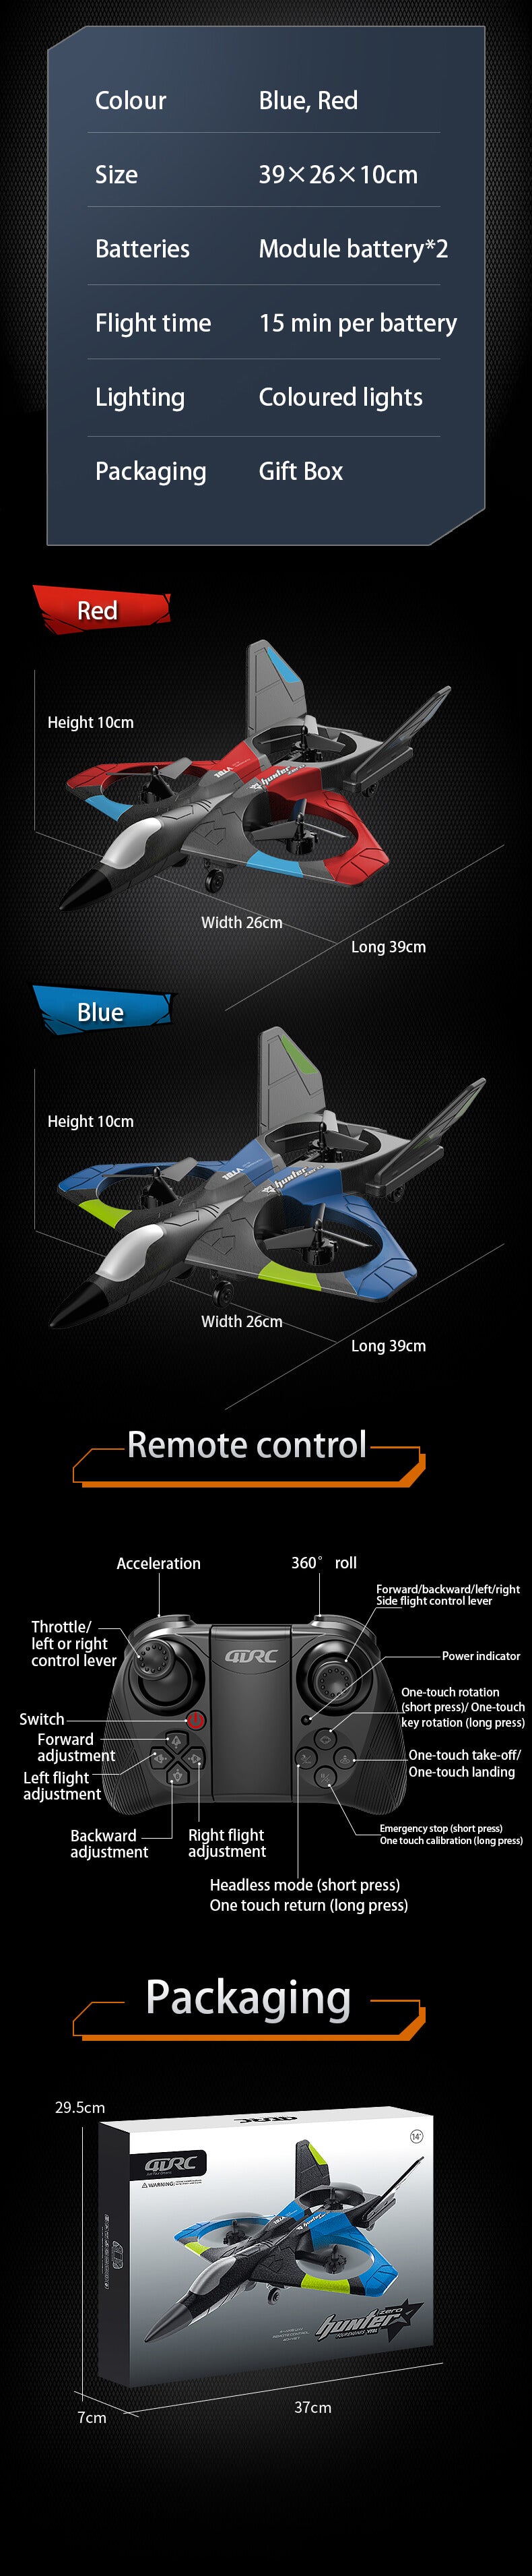 4DRC V27 remote control aircraft 2.4G wireless remote control model aircraft toy children's gift